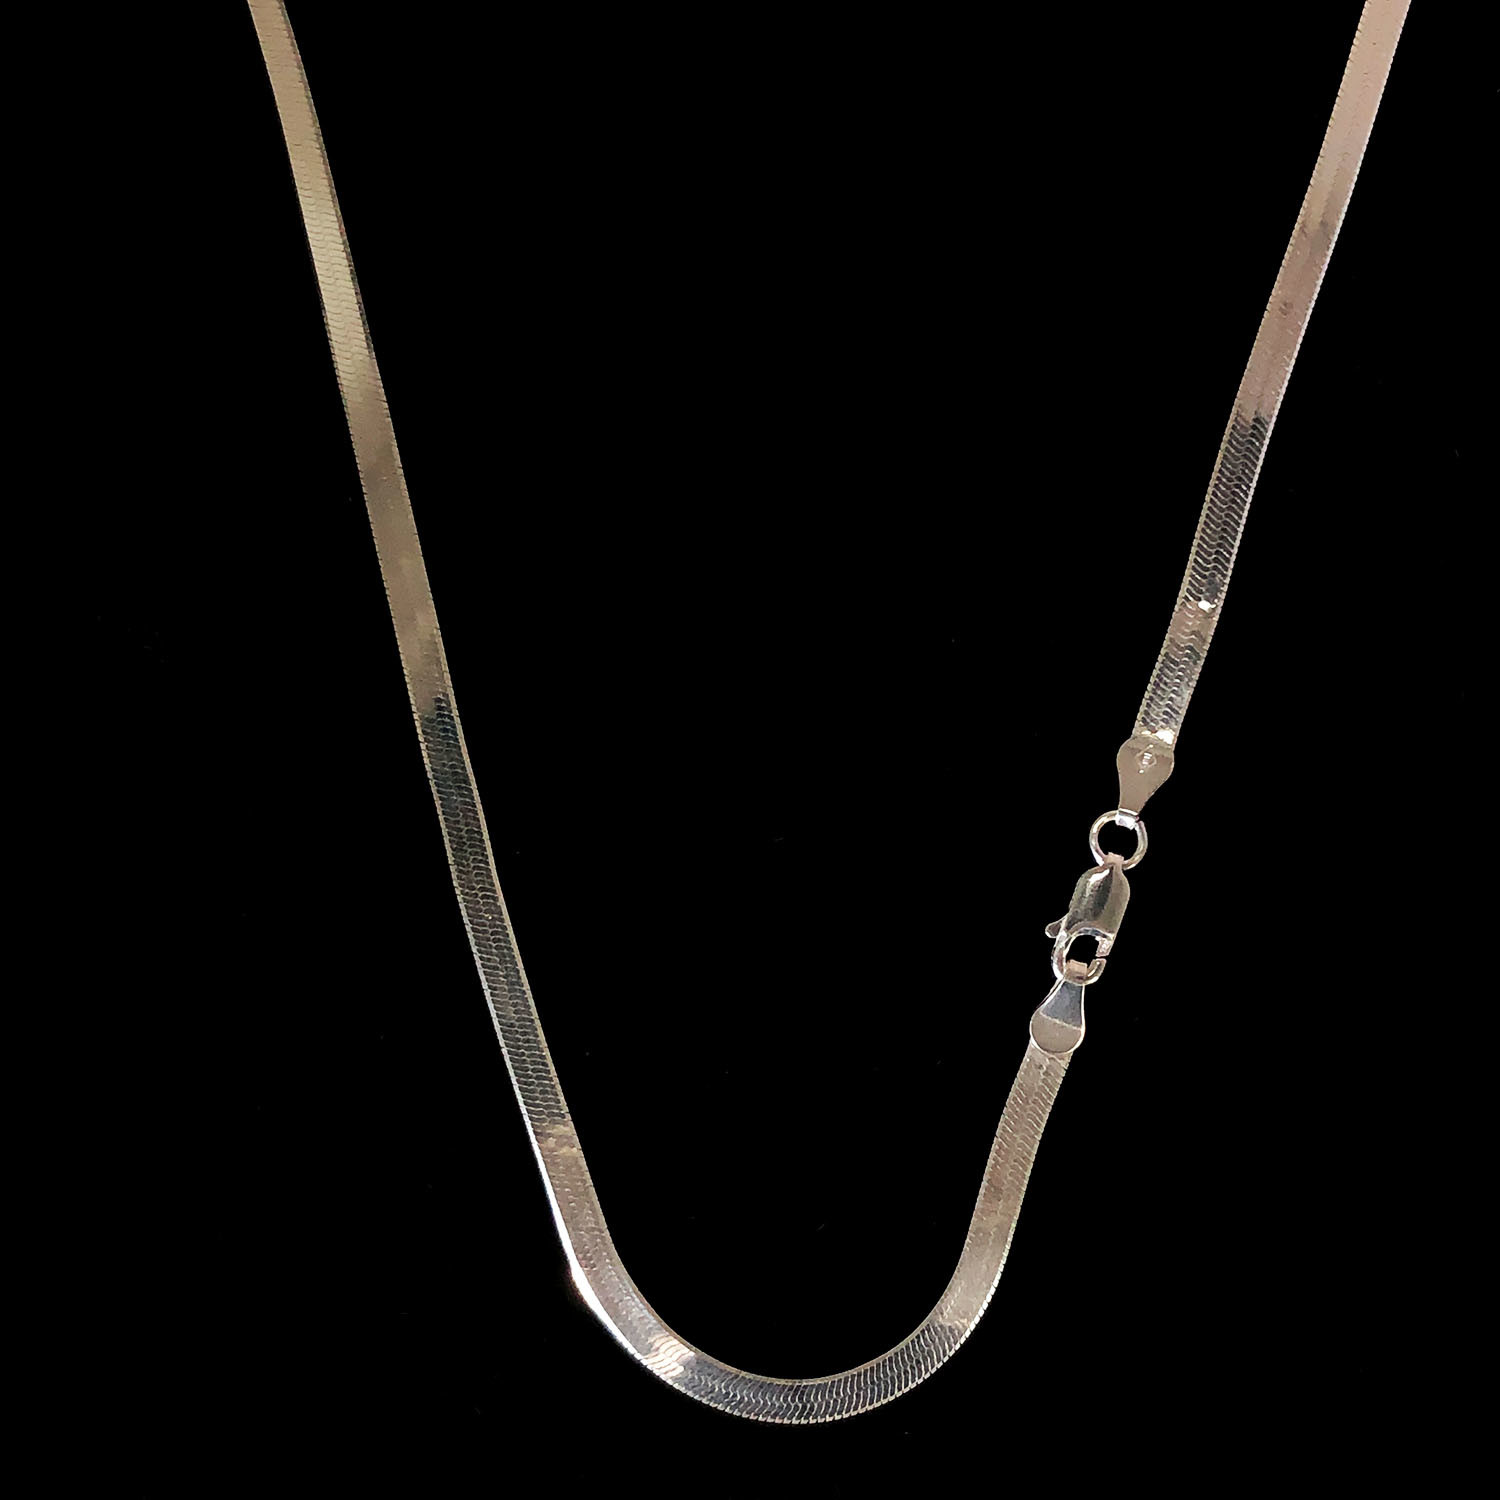 Solid Sterling Silver Herringbone Chain Necklace // 3mm (16") - Best